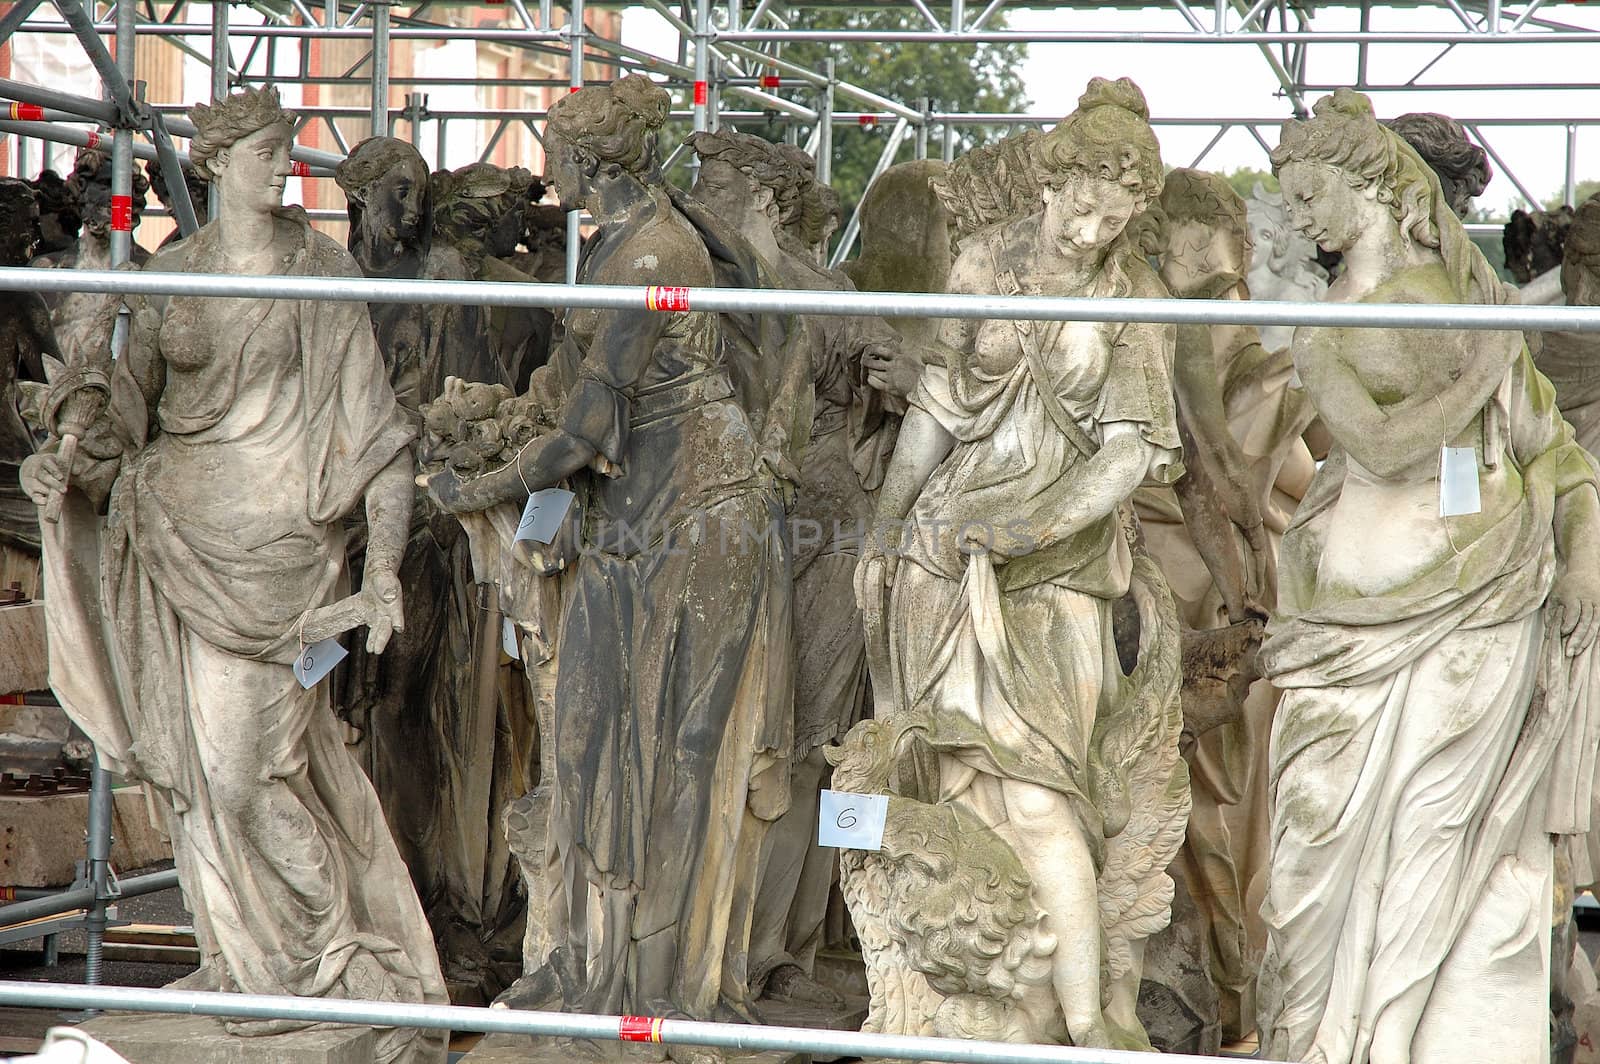 Statues waiting for renovation in Sanssouci park in Potsdam Germany